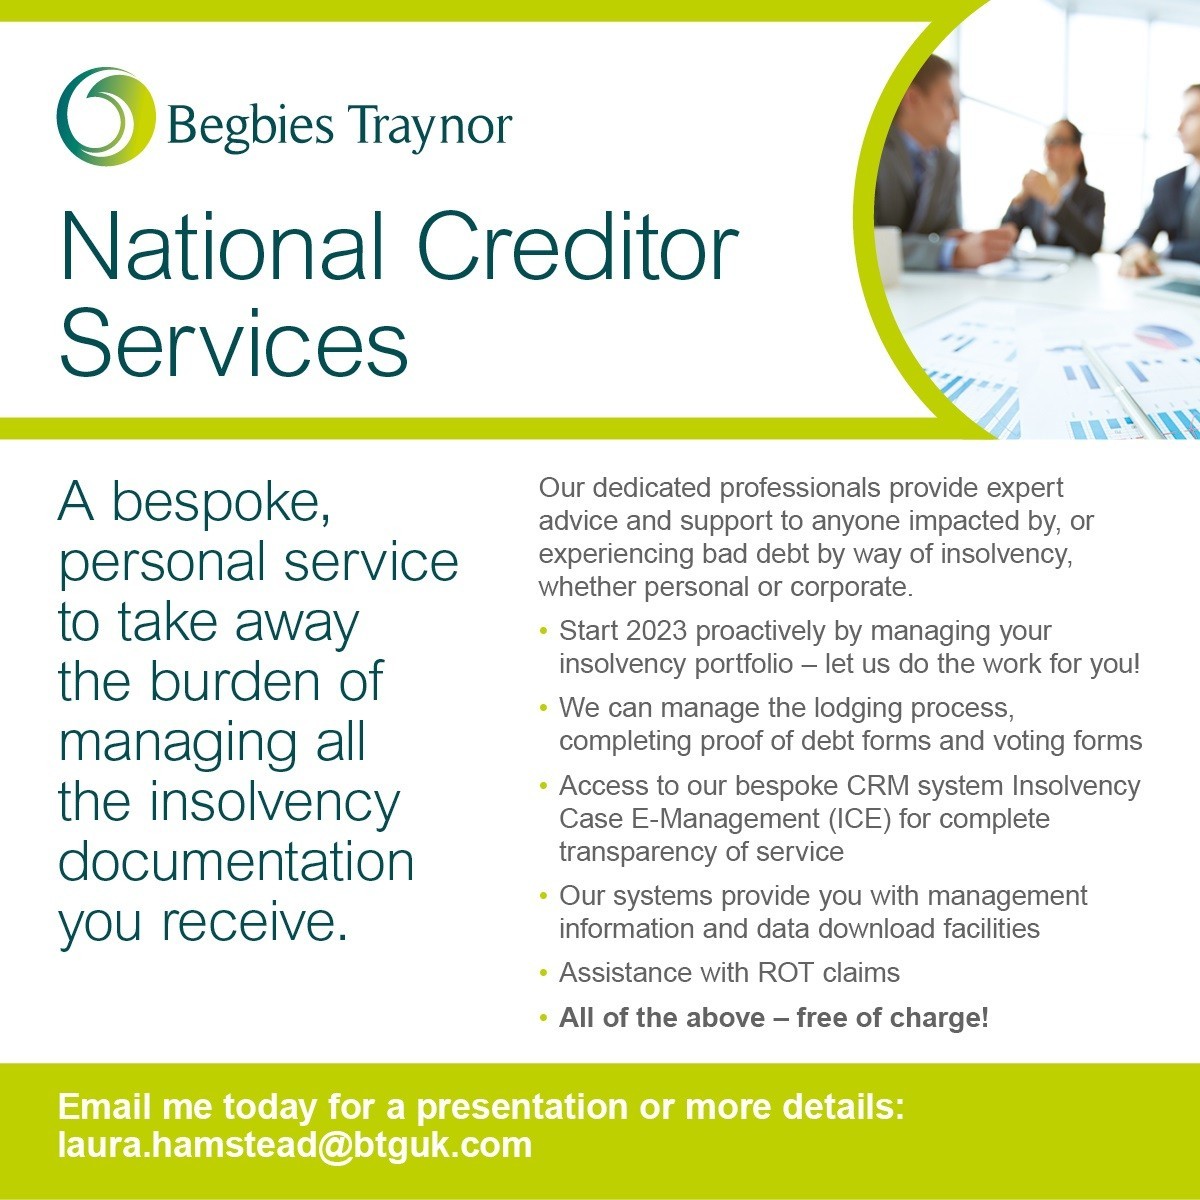 National Creditor Services